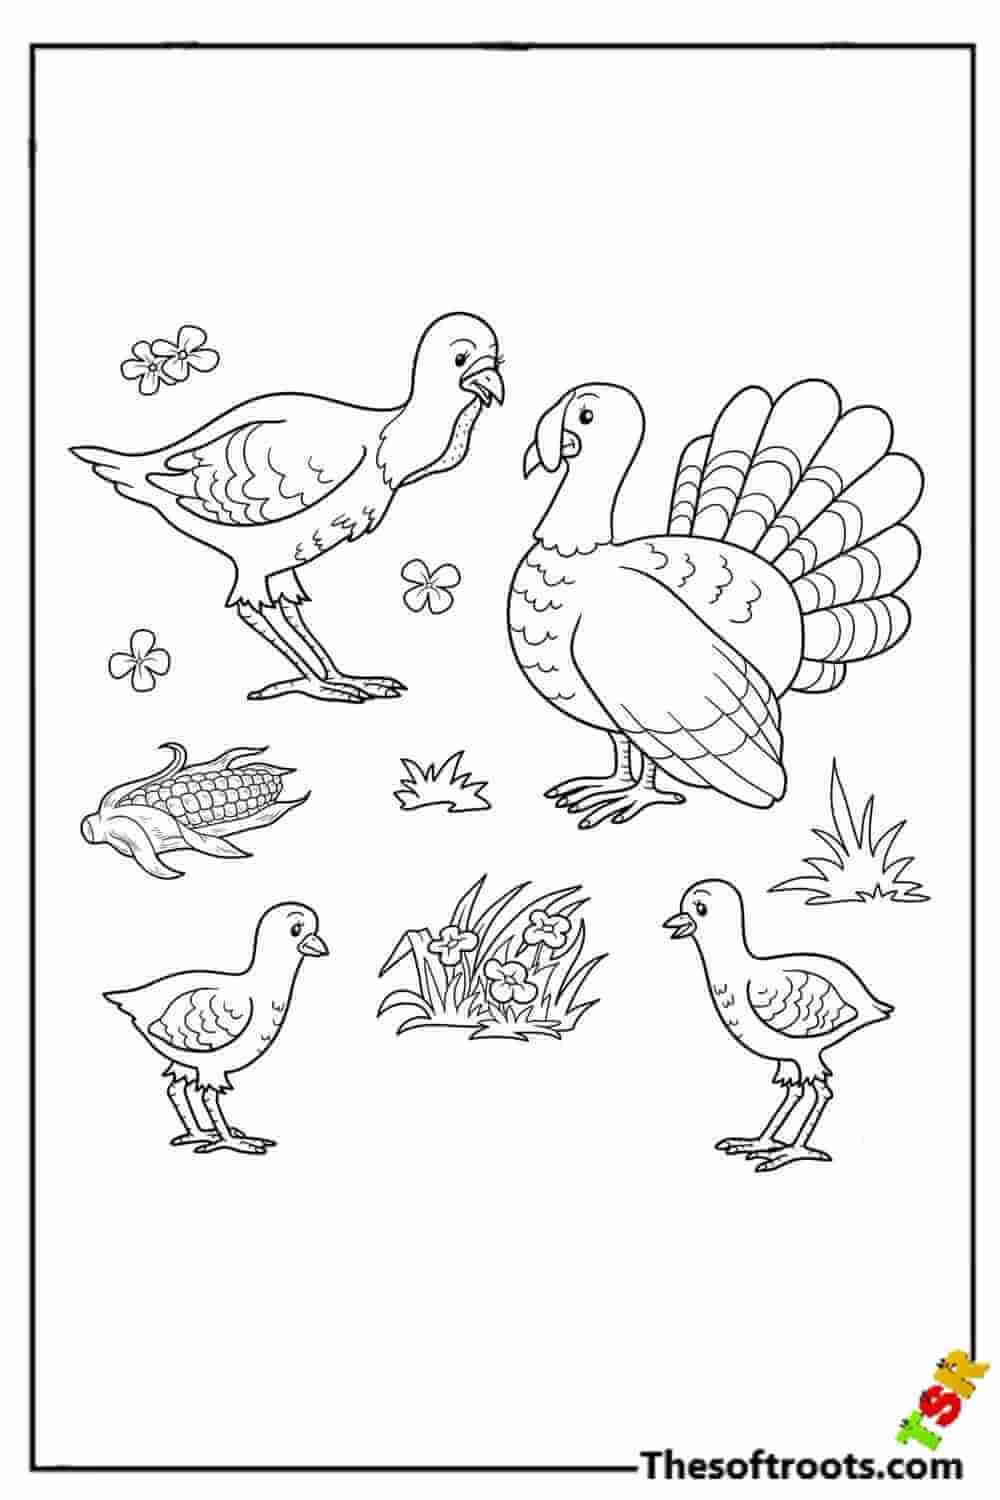 Turkey family coloring pages